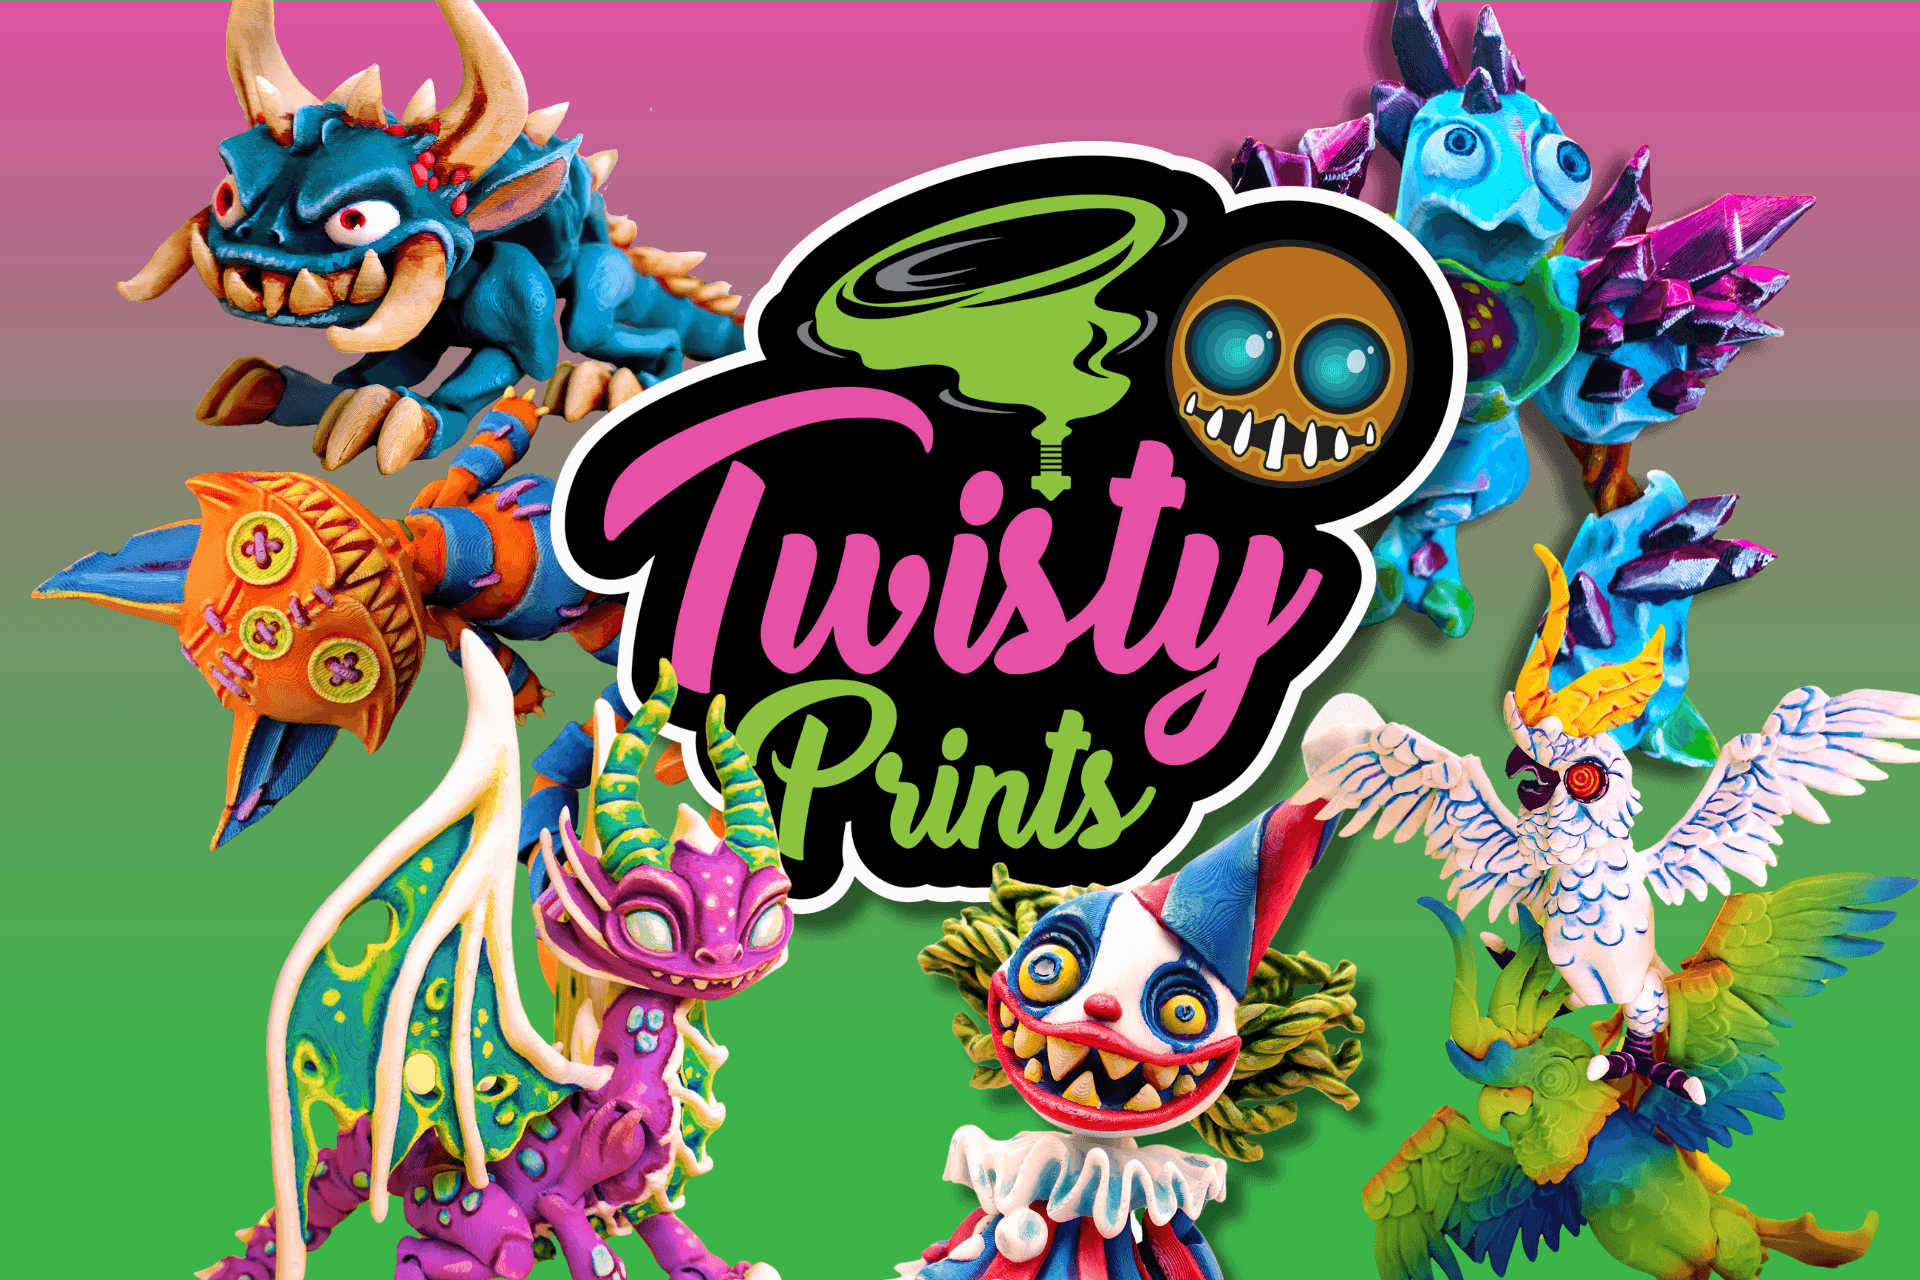 Twisty Prints comes to Thangs!